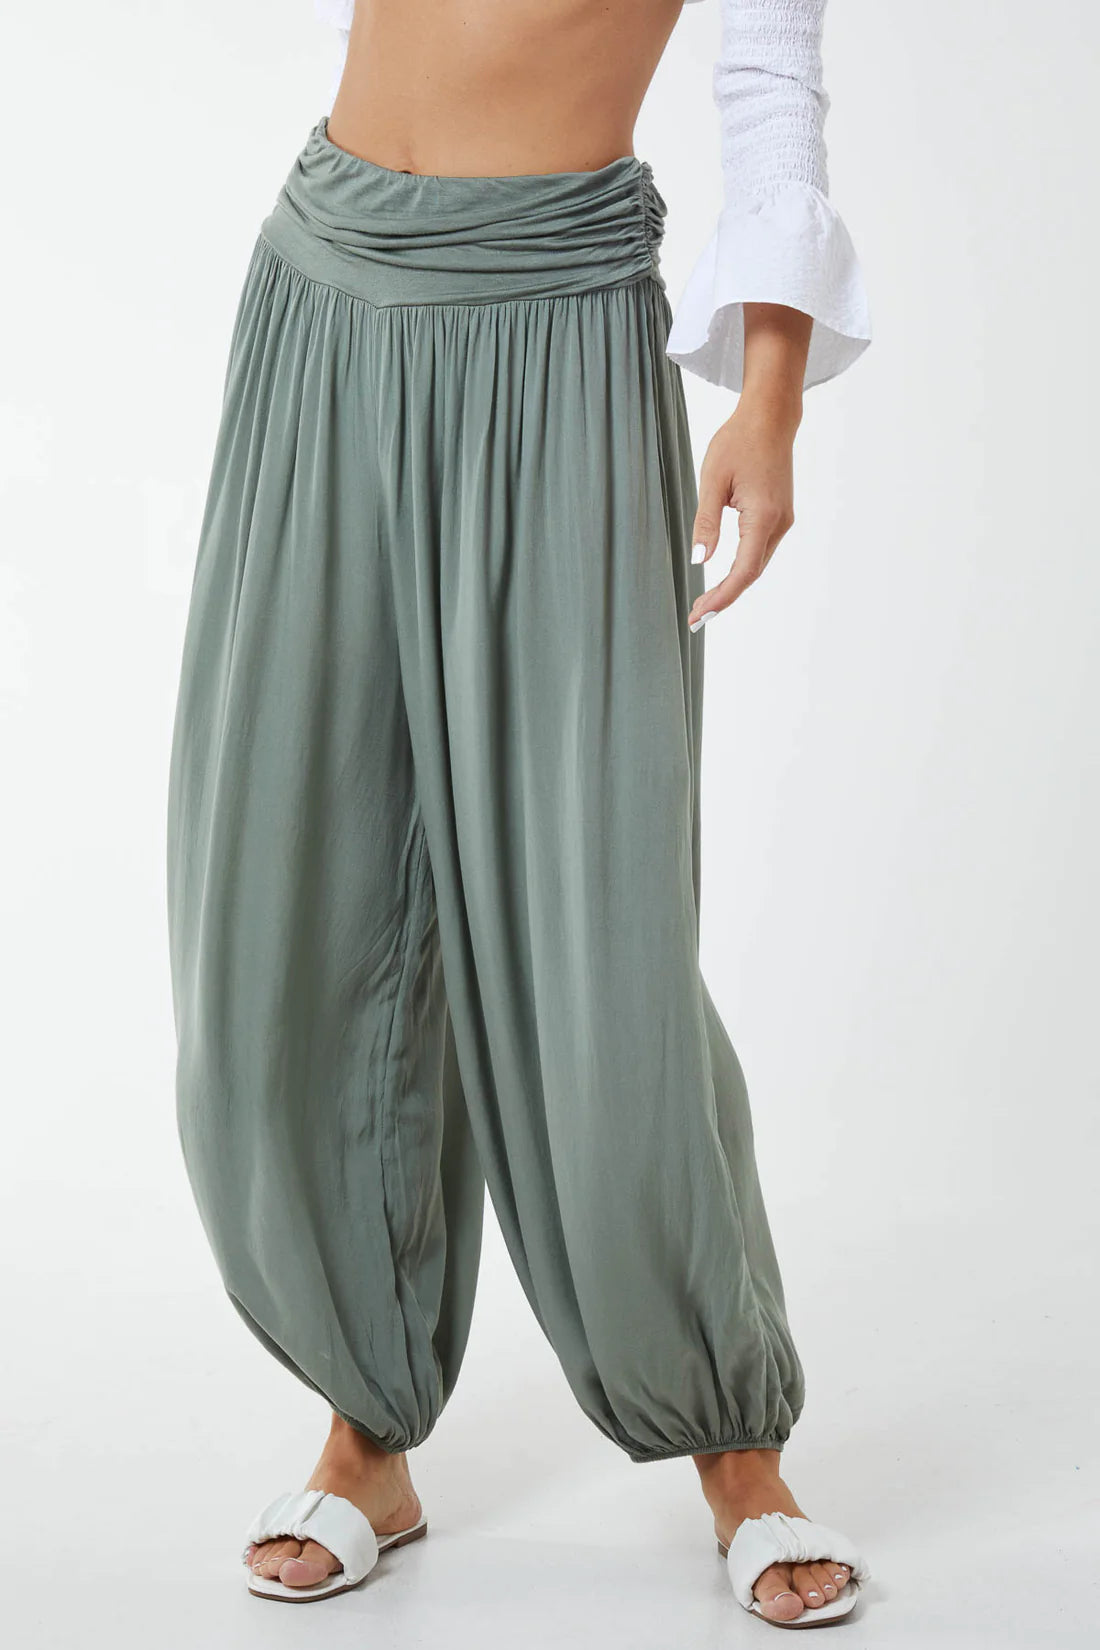 Buy Harem Pants For Women In India – Unmade